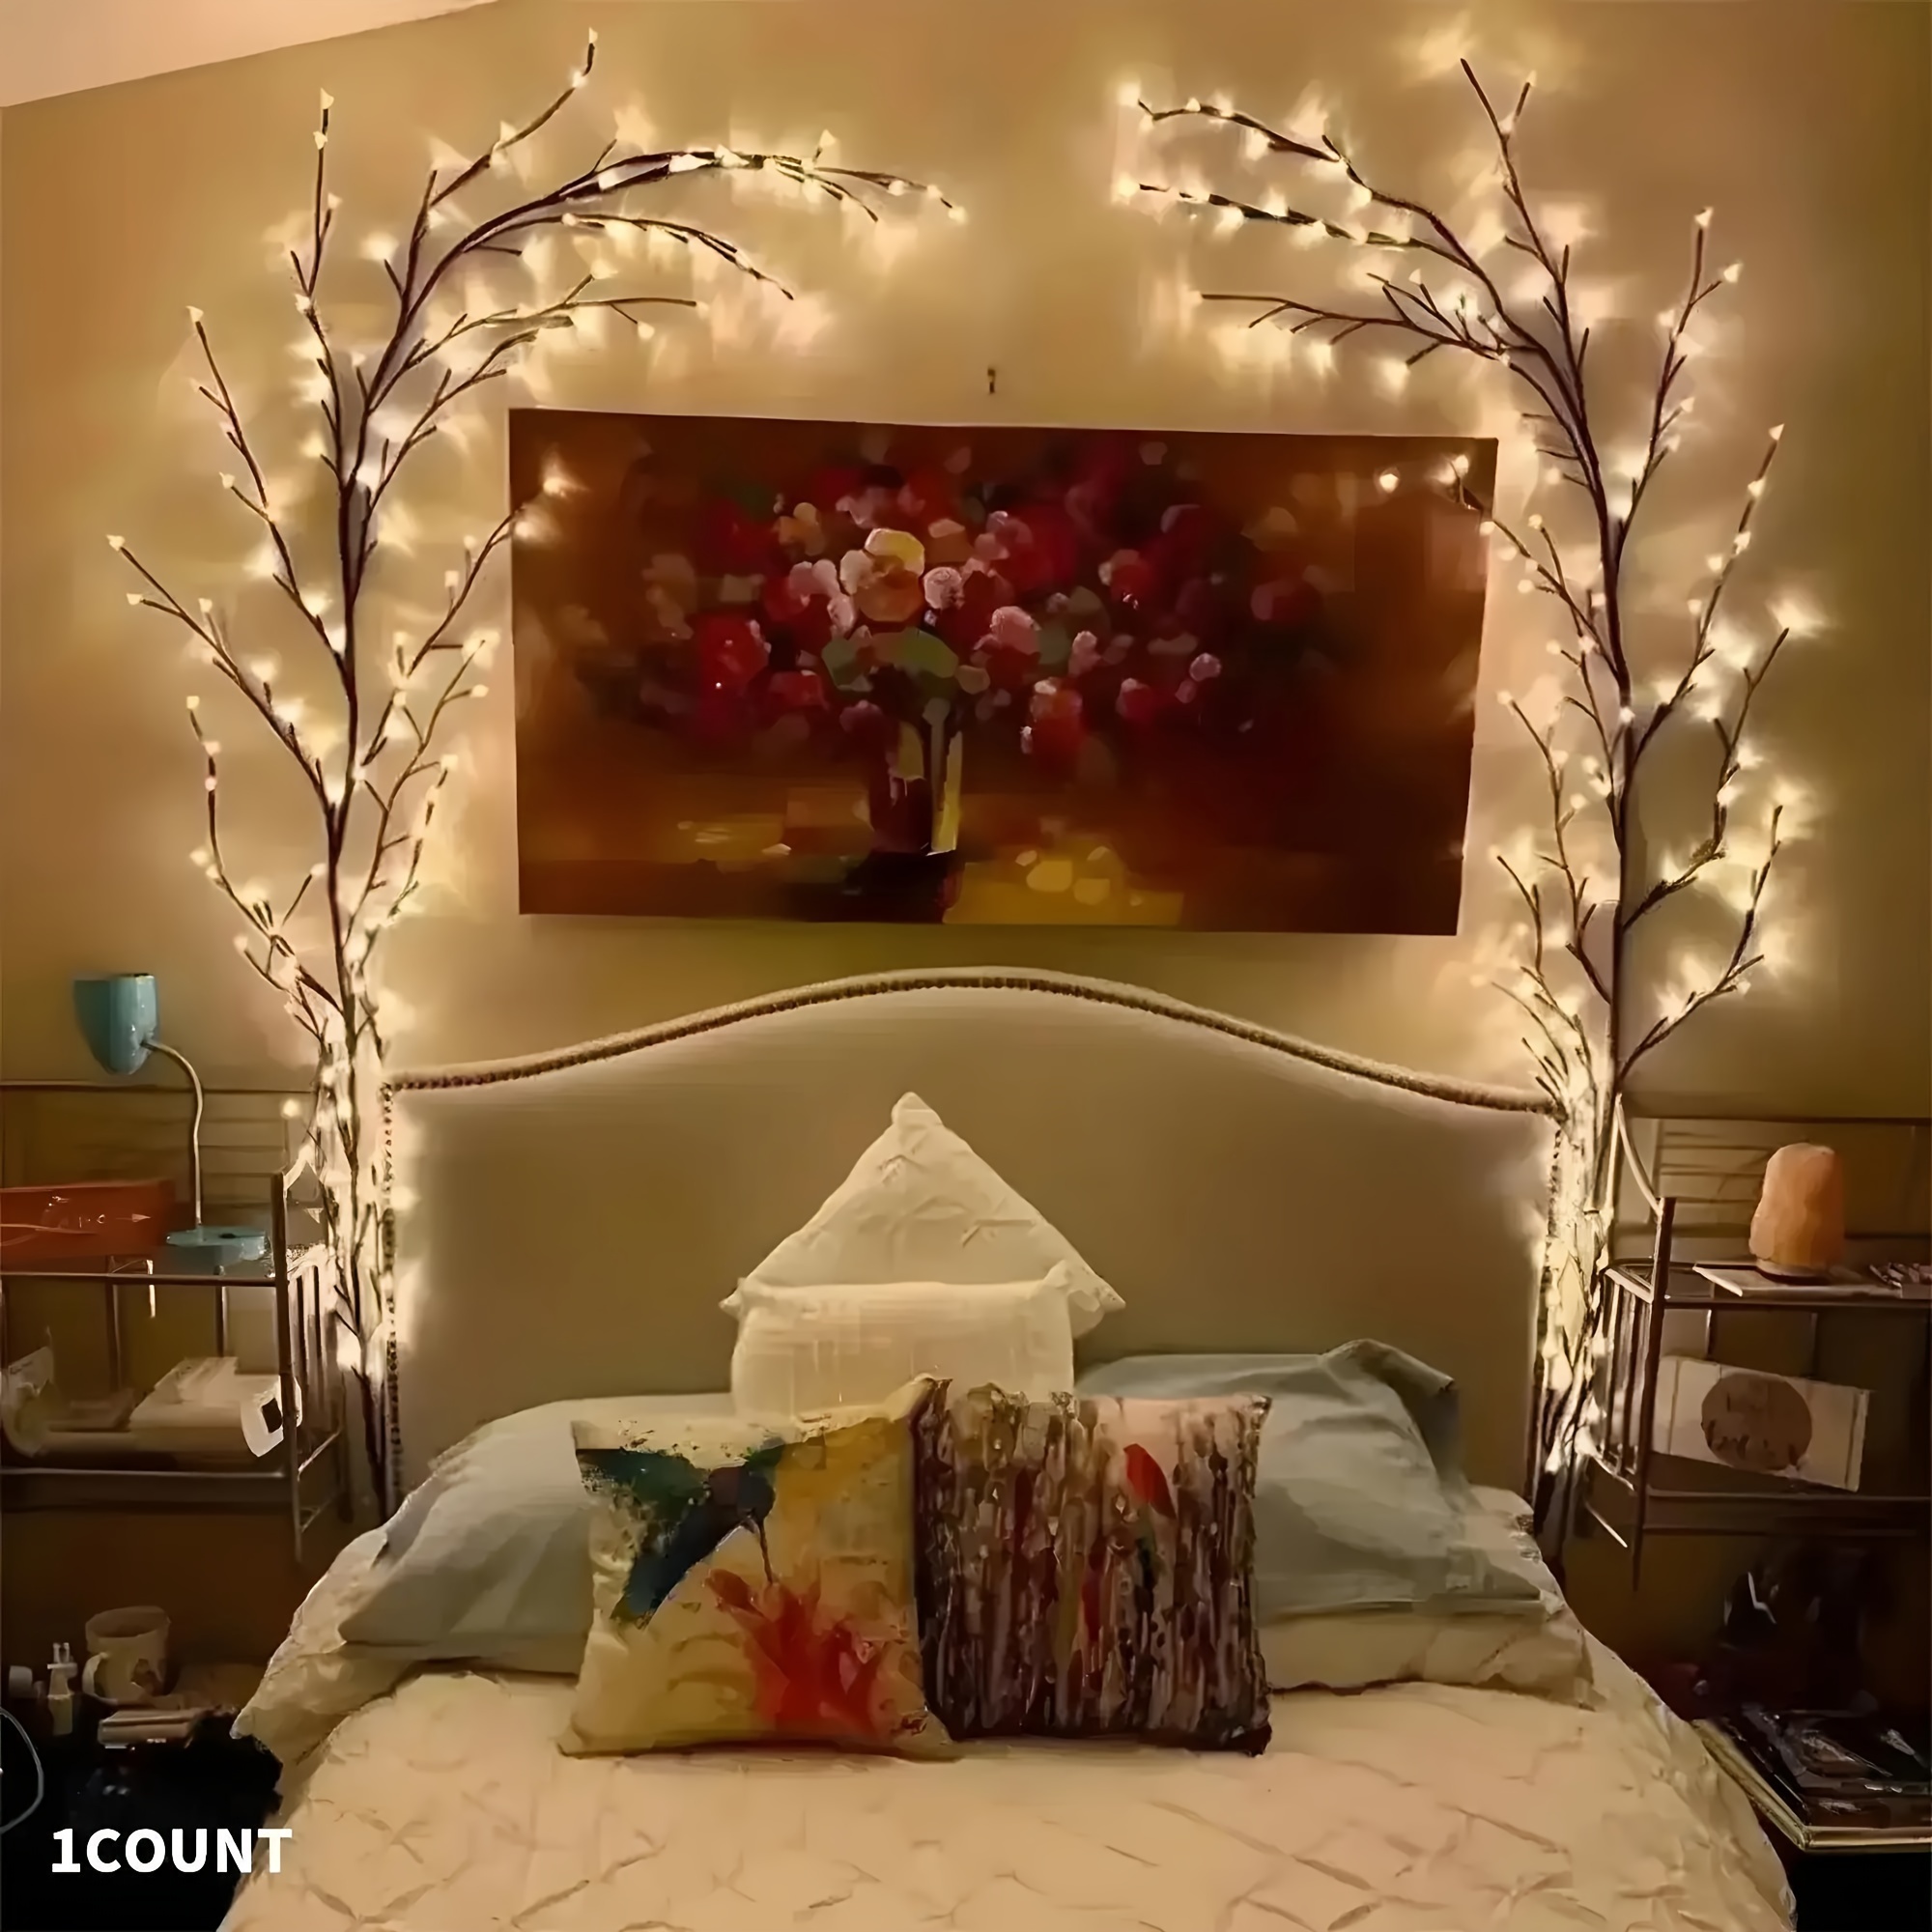 

1pcs 144 Led Cherry Branch Cane For Living Room Bedroom Outdoor Decoration New Year's Day Valentine's Day Easter Thanksgiving And Other Holiday Party Decoration)